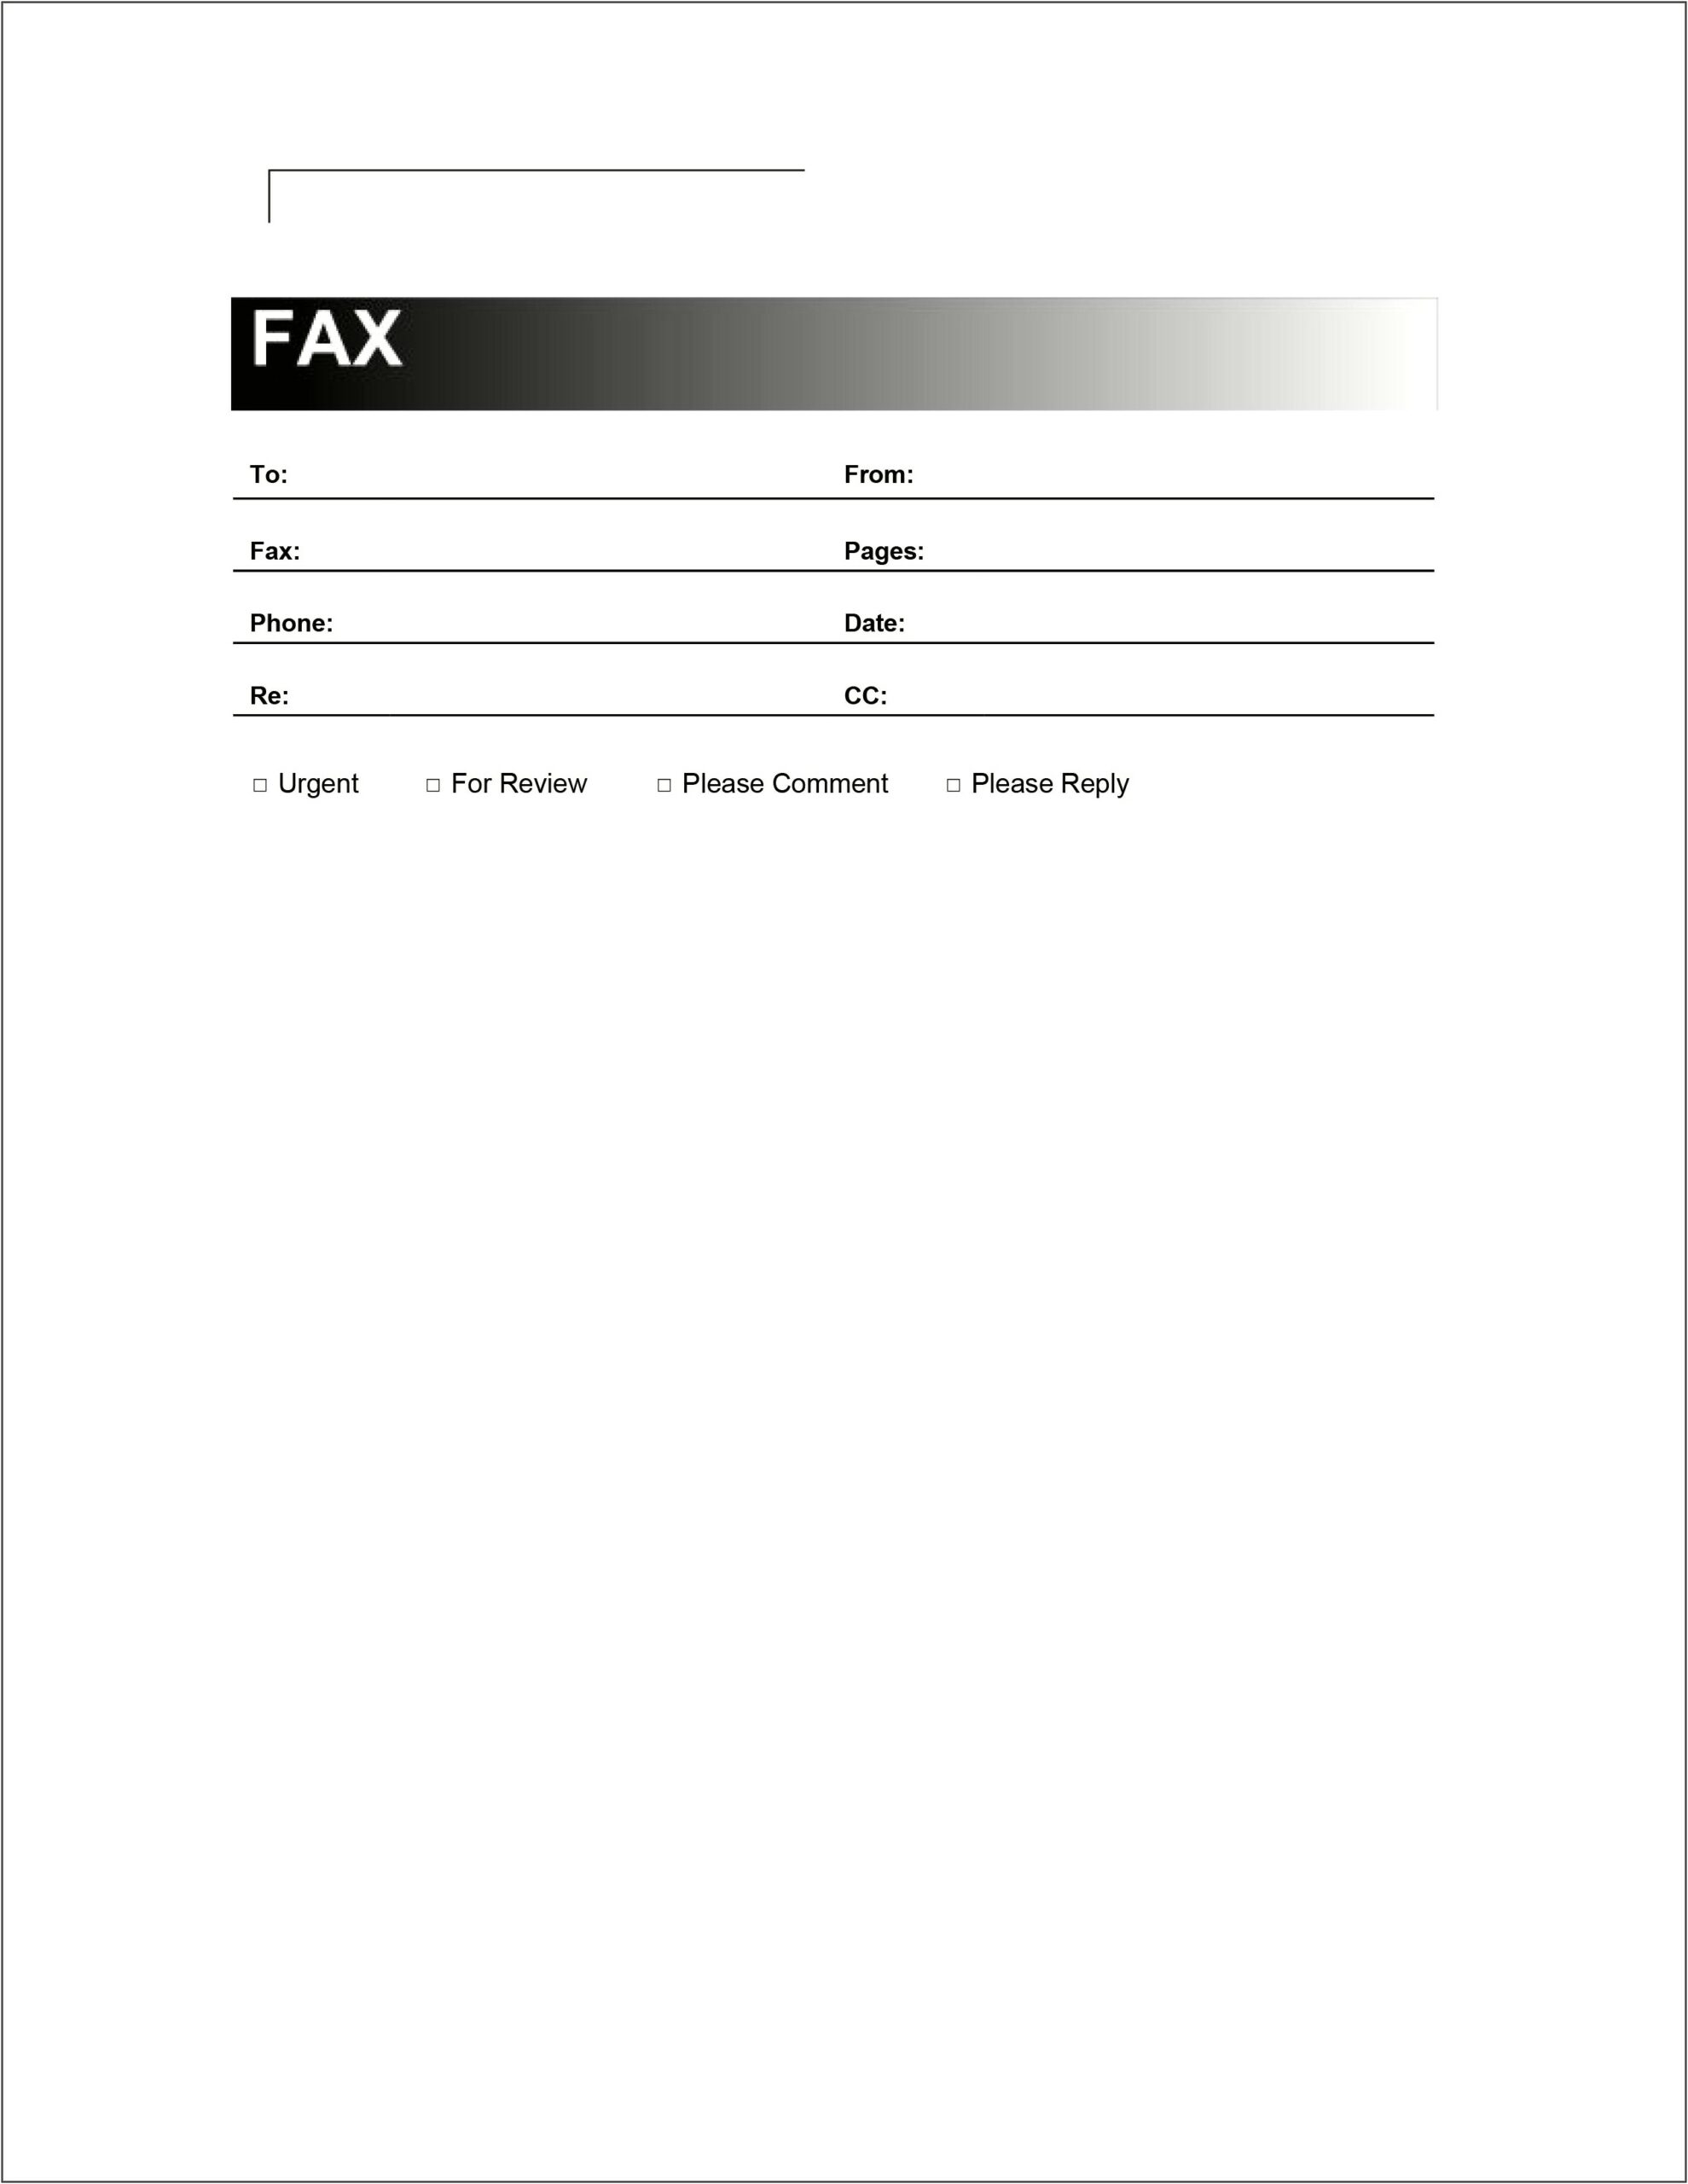 Fax Cover Page Template Microsoft Word